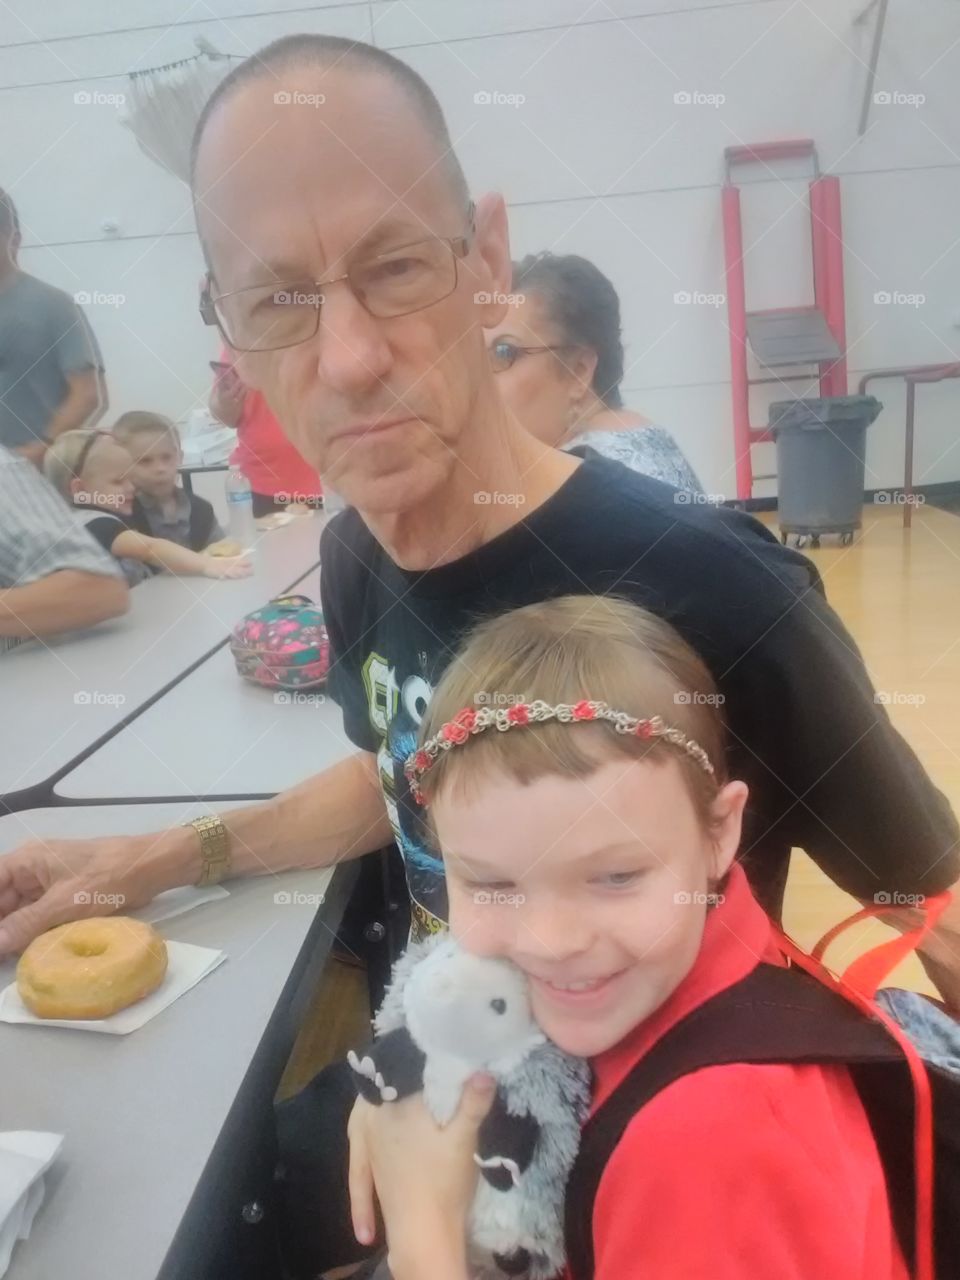 grandparents day at my daughter's school. she loves being with her Grandpa and her Grandpa loves spending time with her.